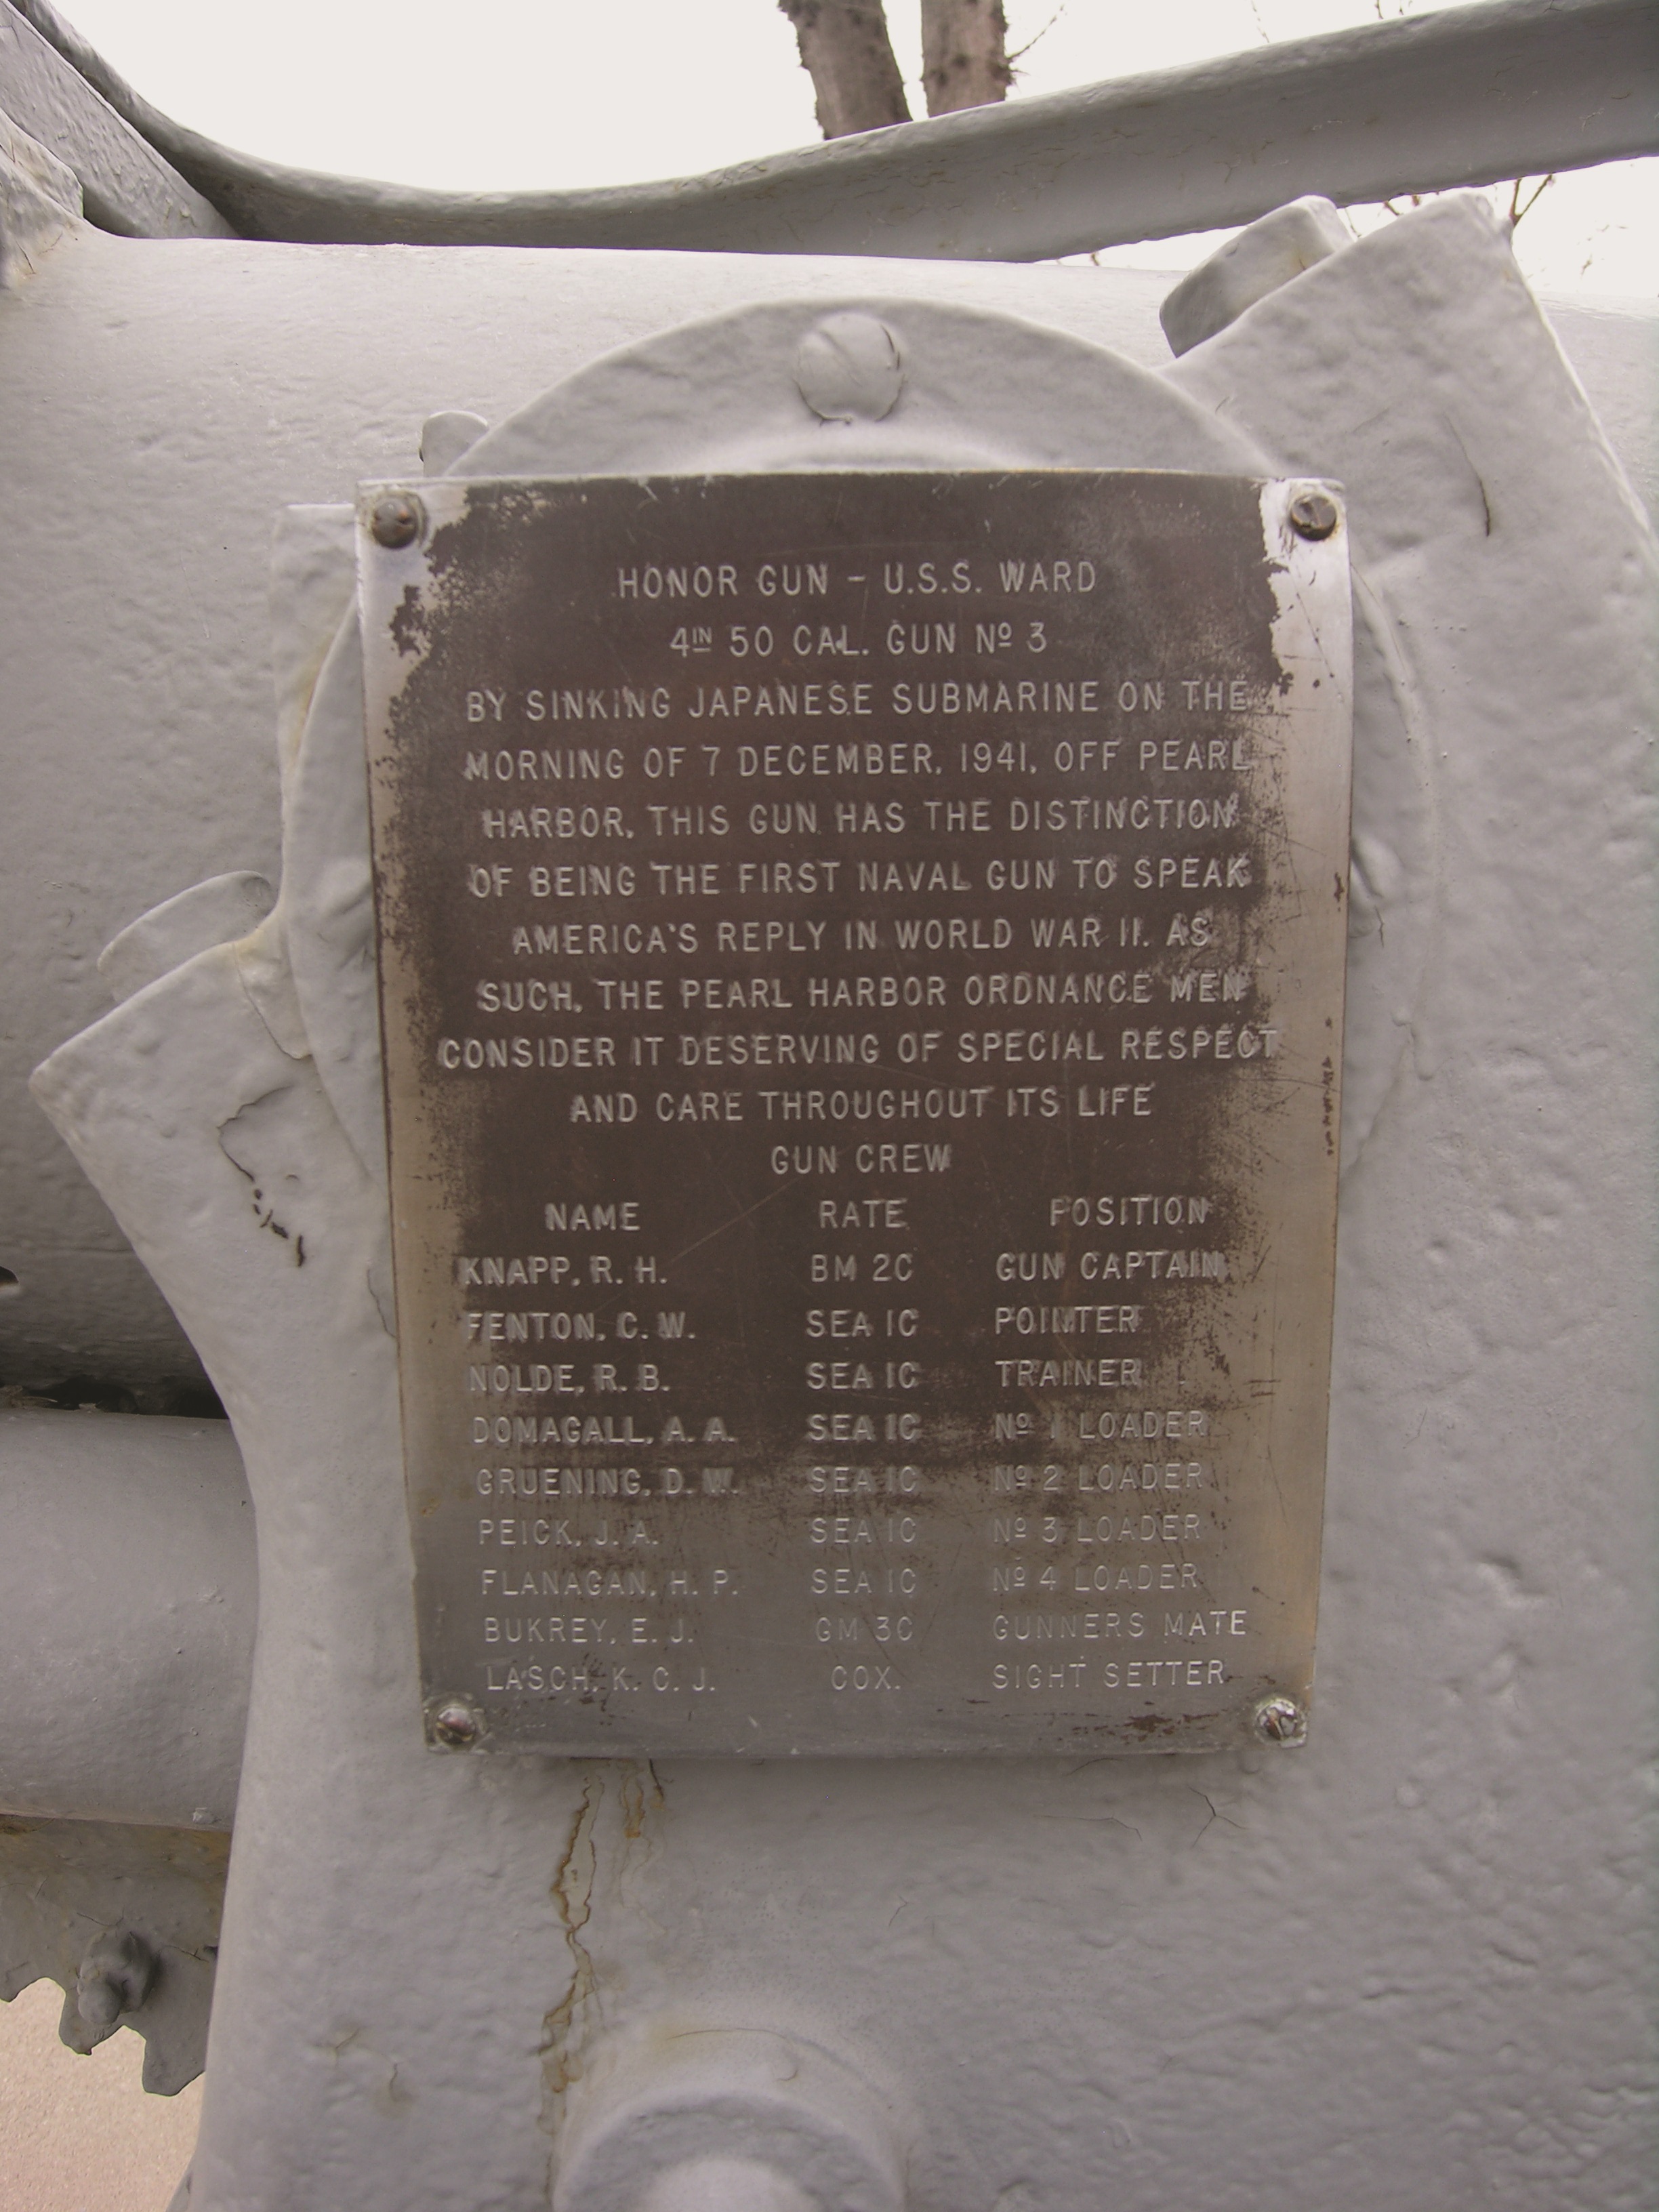 A plaque attached to the USS Ward gun lists the names of the gun crew and speaks to the gun's significance. Credit: James P. Delgado